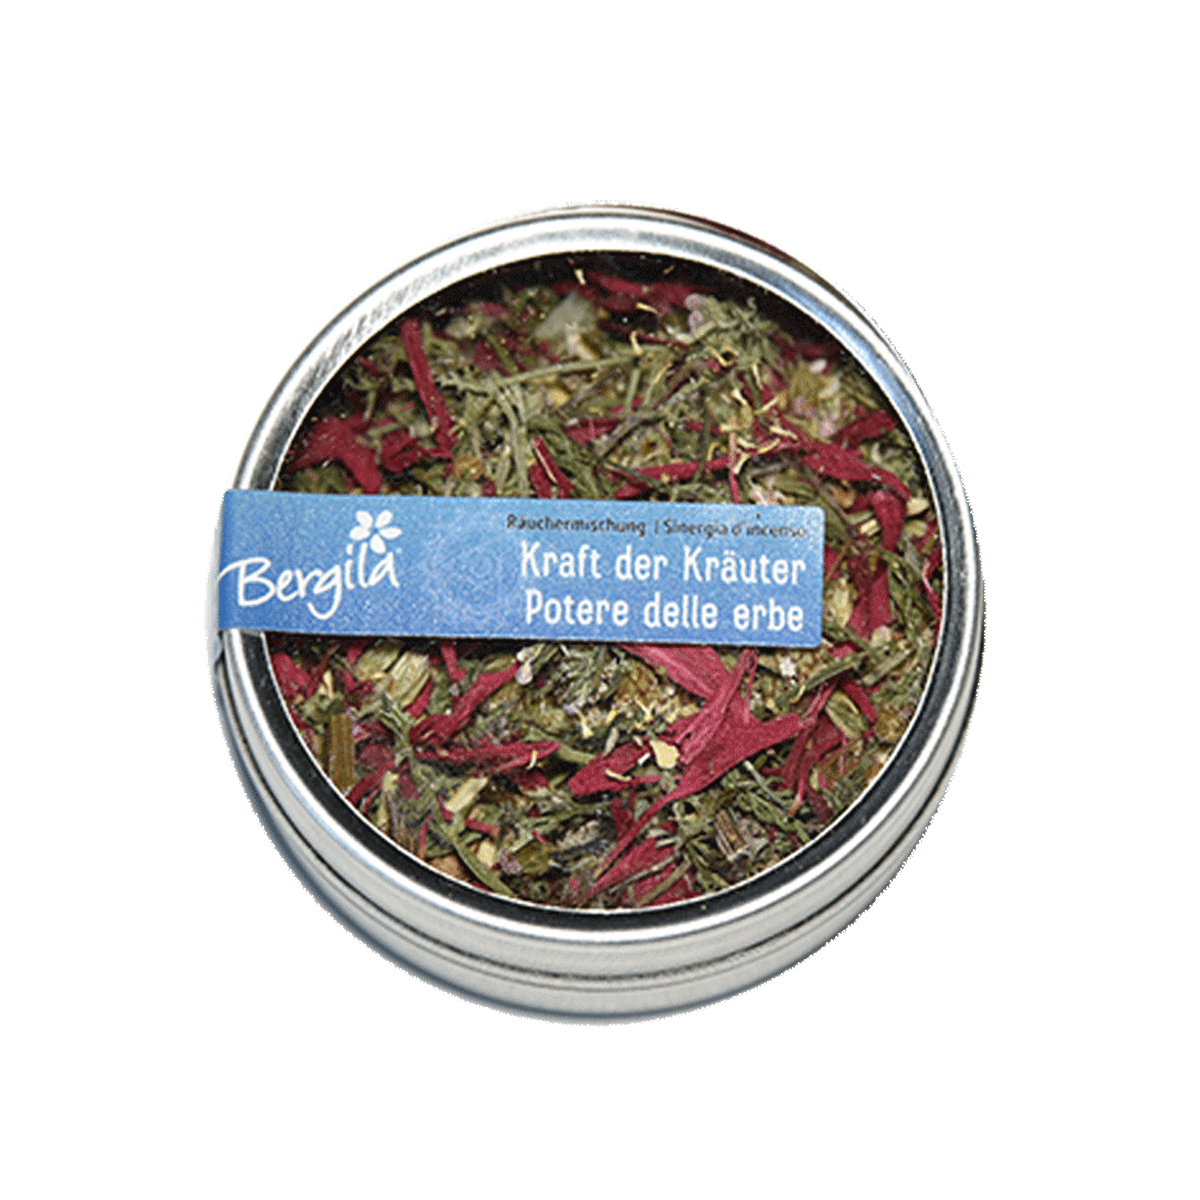 Incense mixture 'Power of herbs'  <br>